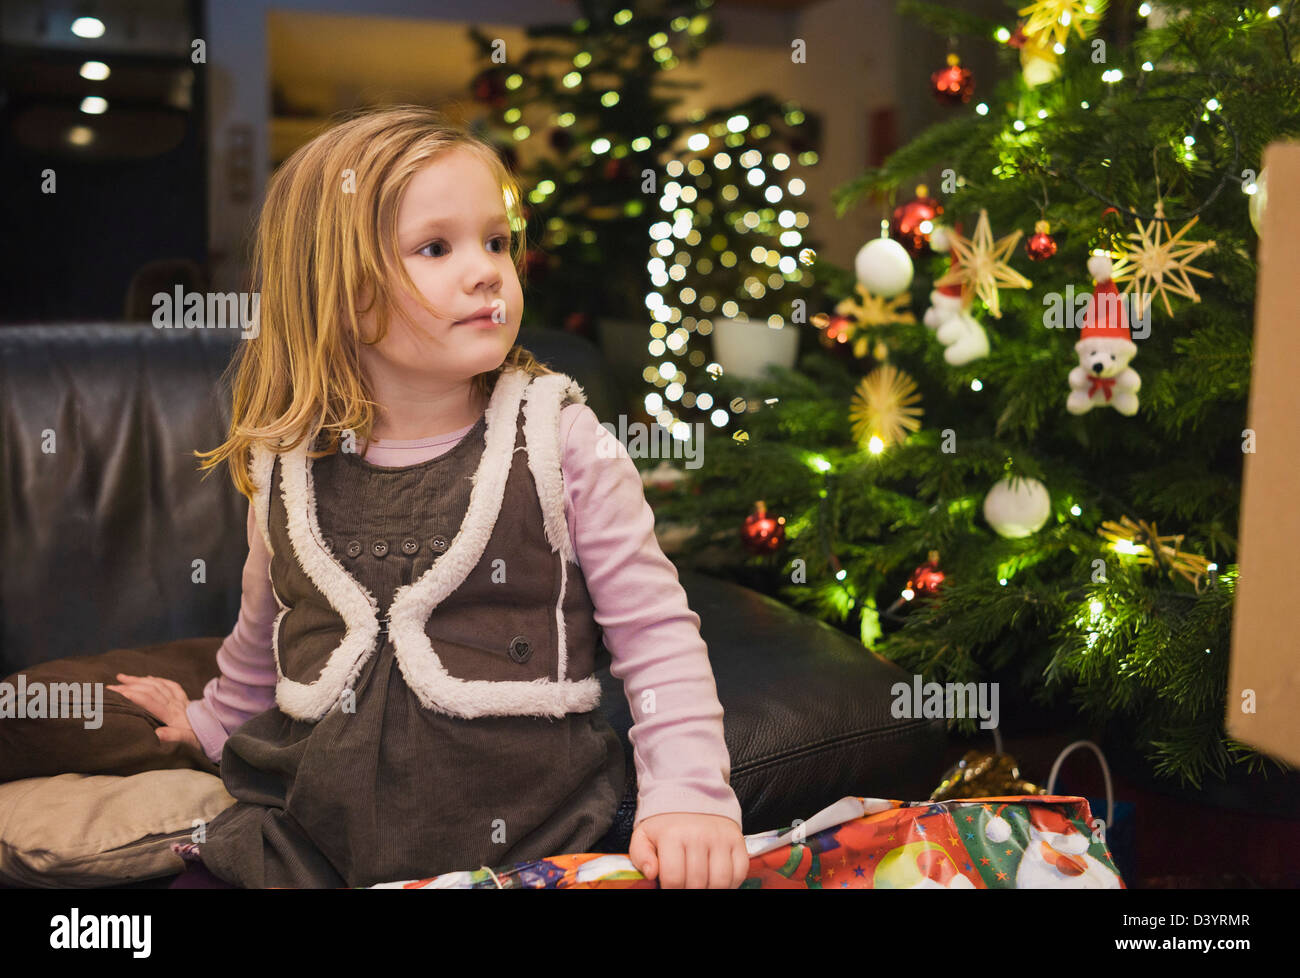 Girl on at Home with Christmas Tree, Germany Stock Photo